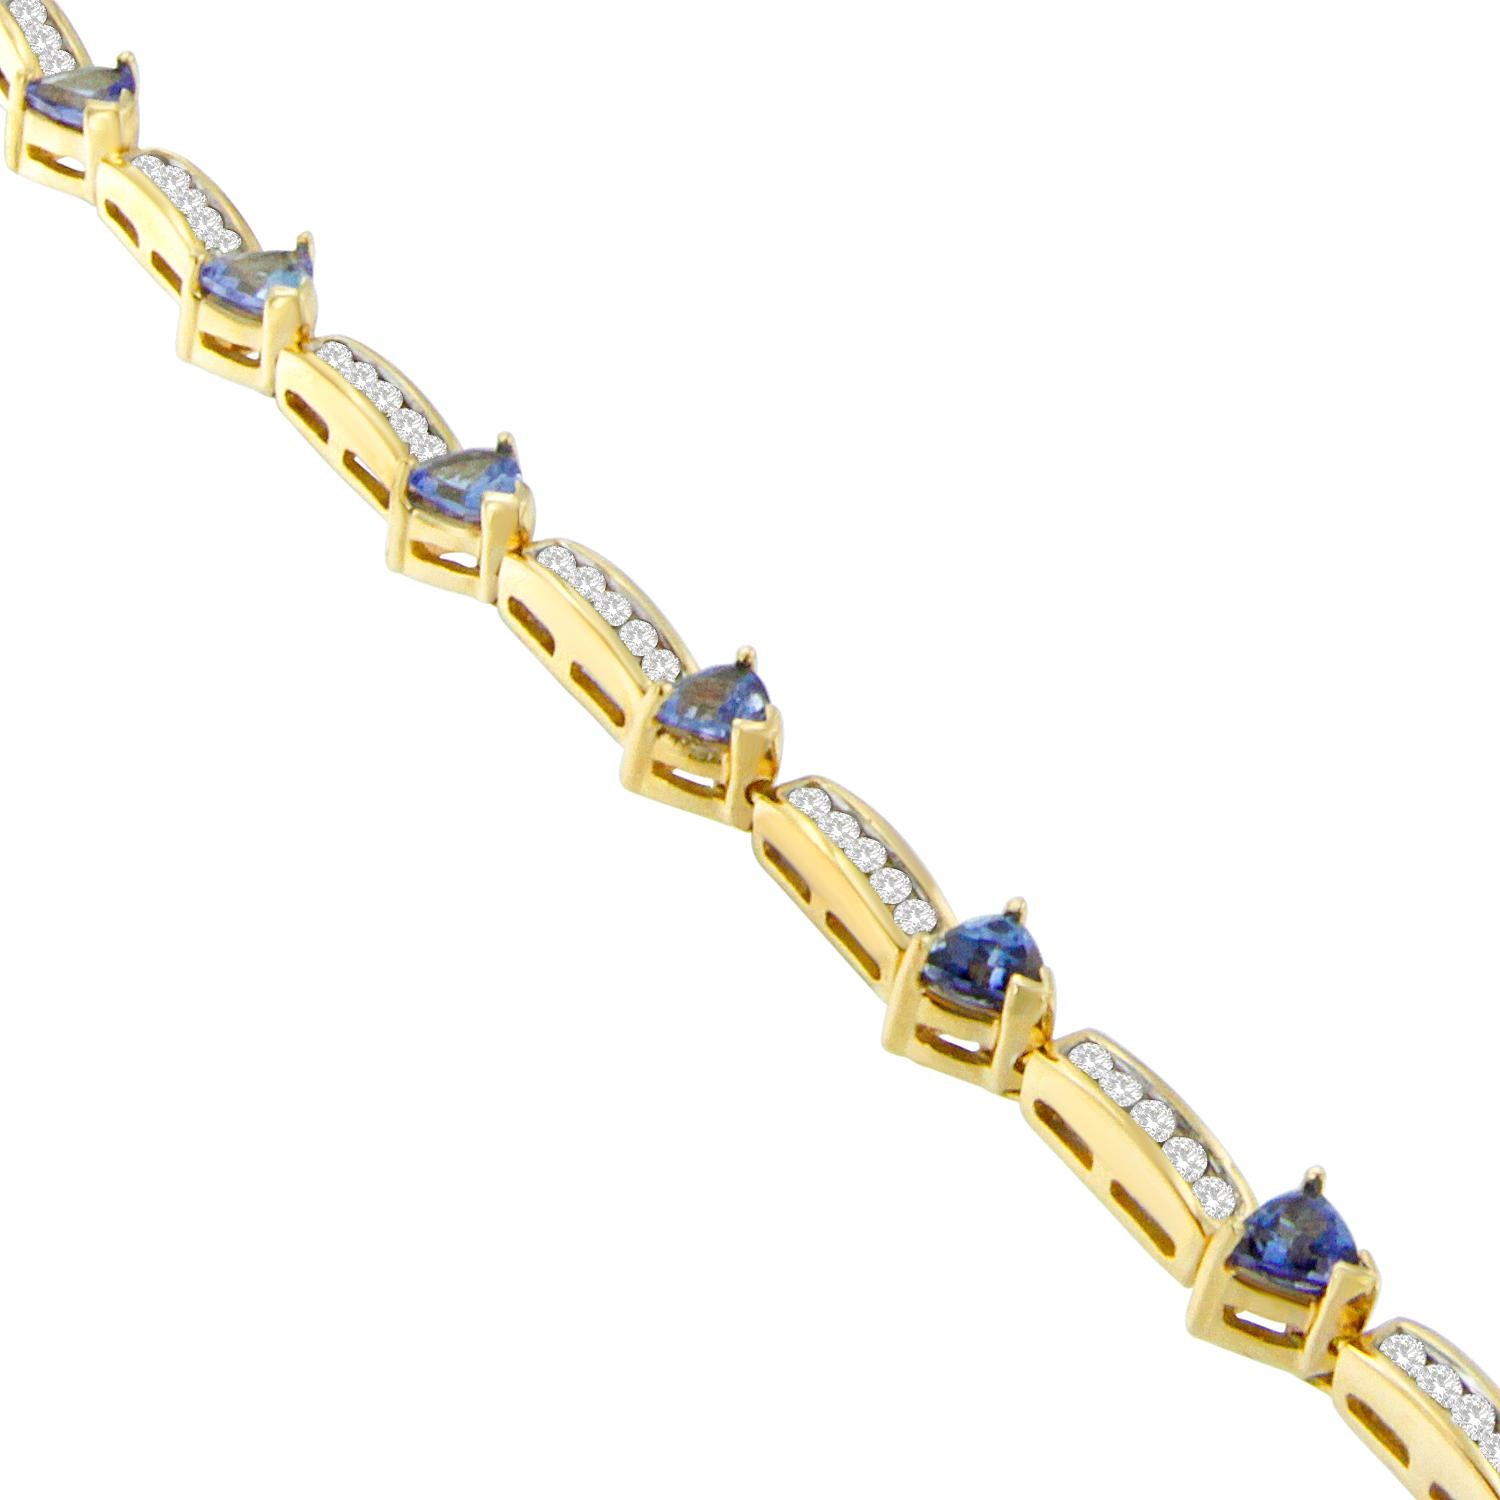 Give the gift of timeless elegance with this 14k yellow gold, diamond, and gemstone bracelet. Links alternate between lush blue tanzanite and round cut diamonds for a look that is classic without being fussy. Each piece is polished to perfection and